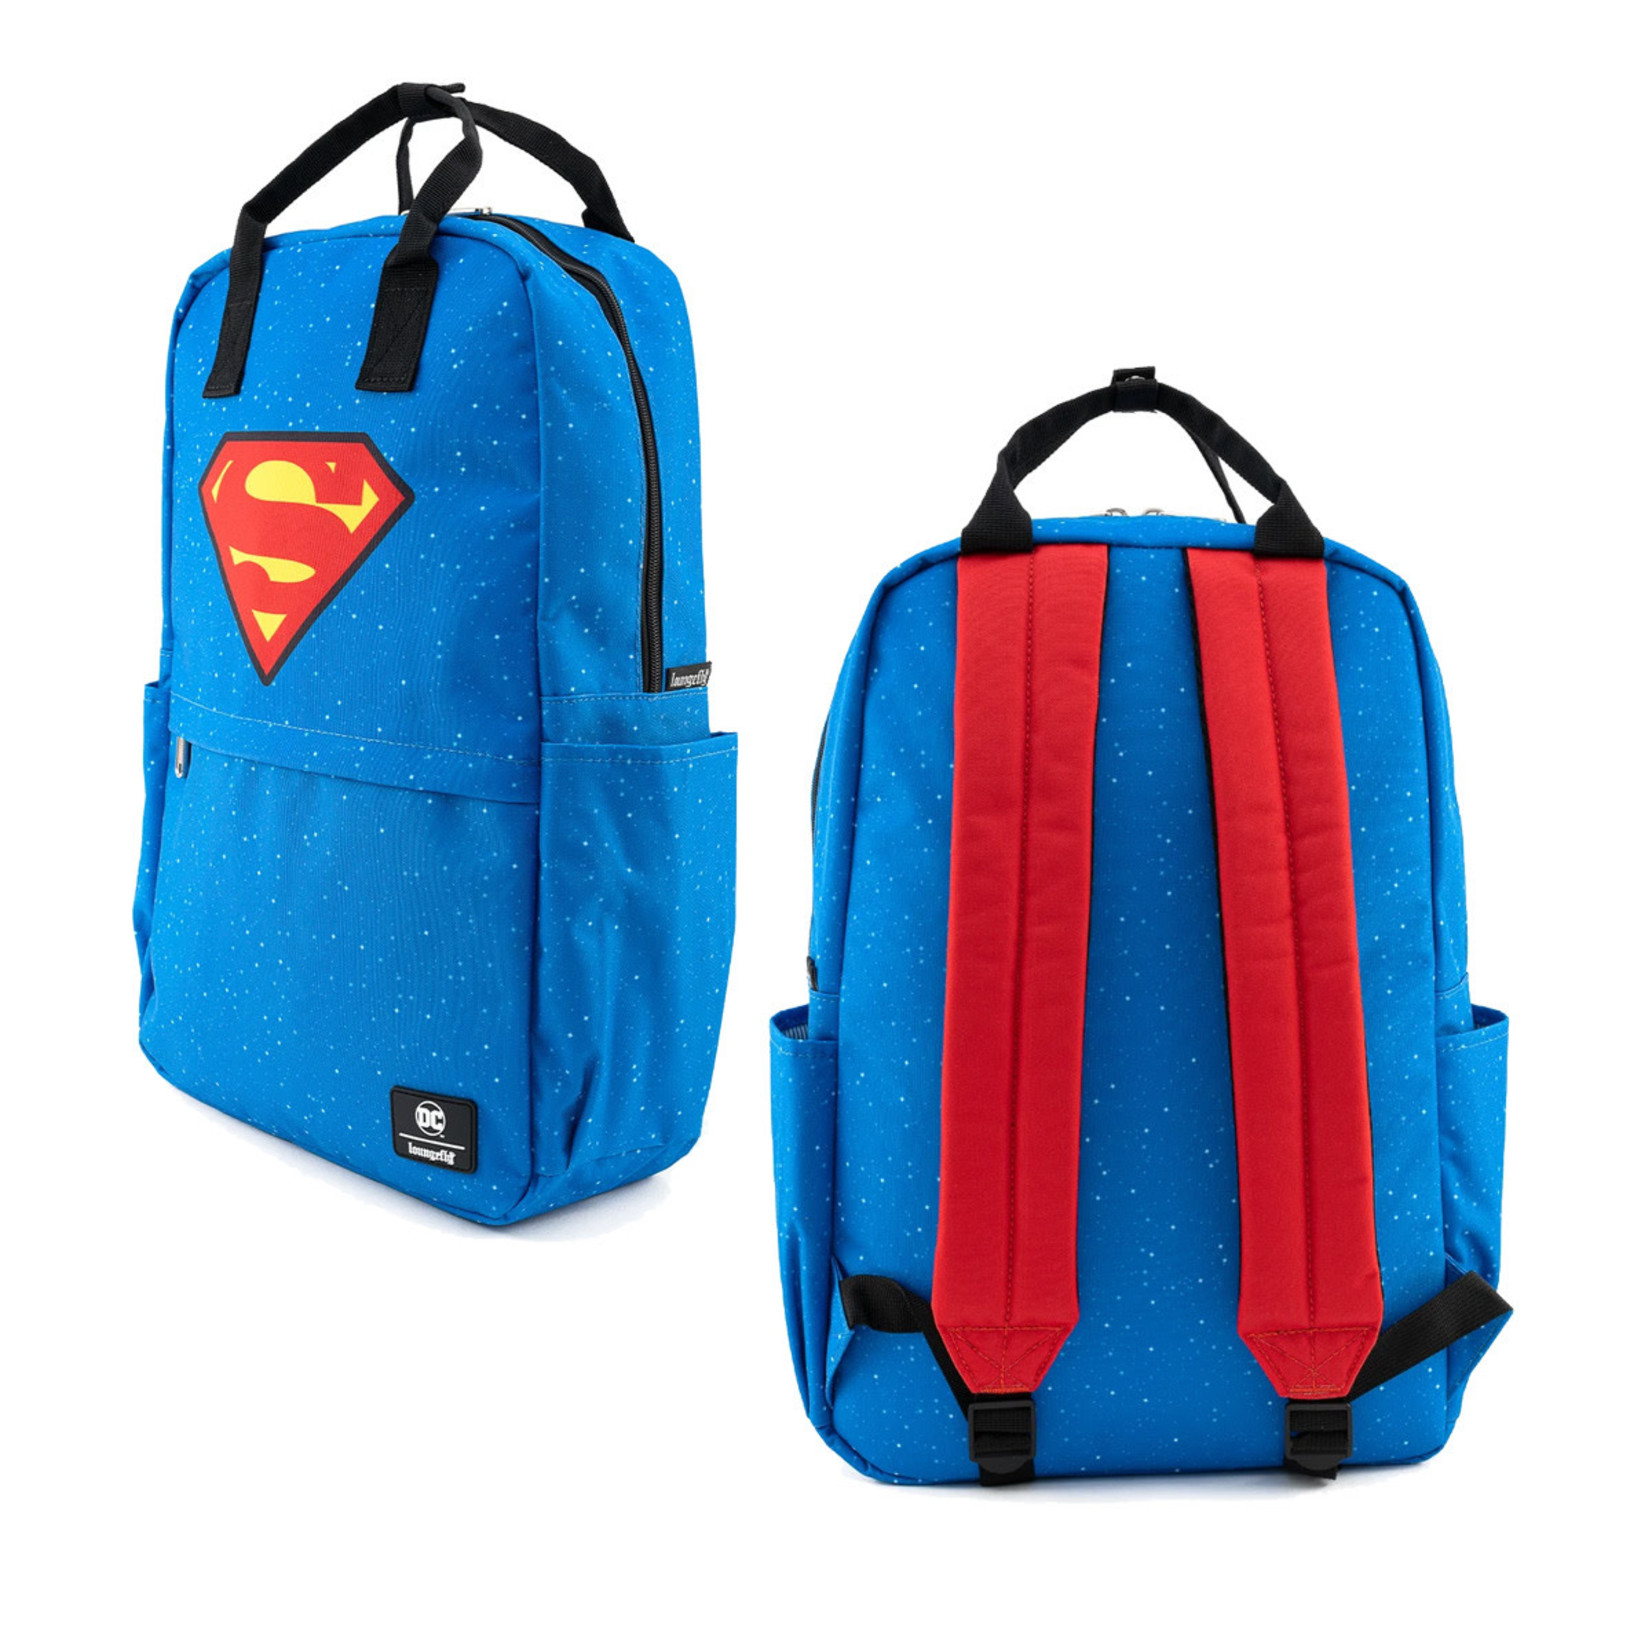 Loungefly LOUNGEFLY DC SUPERMAN SHIELD Backpack